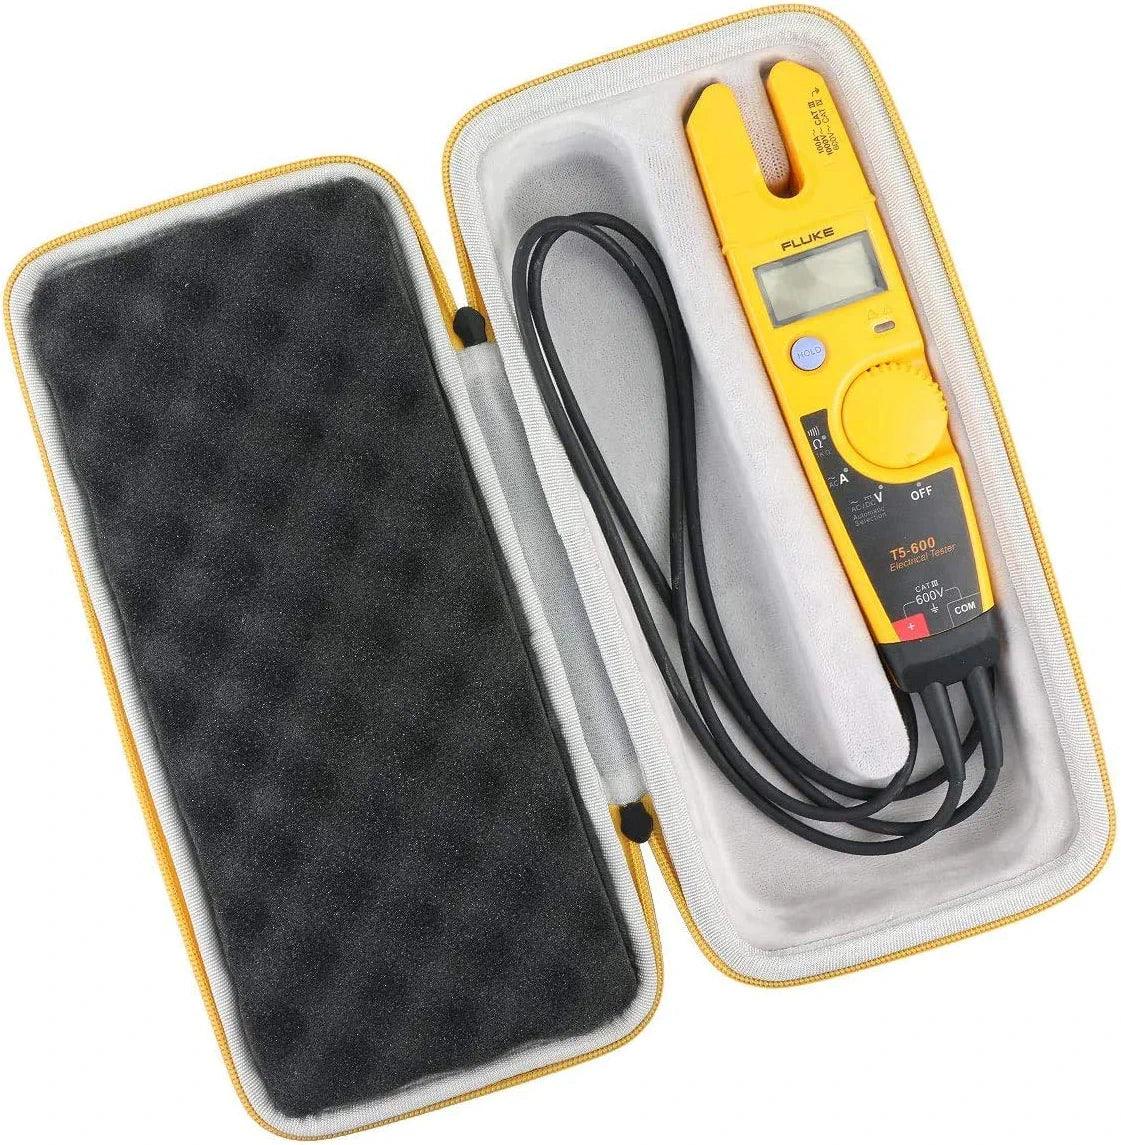 Hard Case Replacement for Fluke T5-1000/T5-600/T6-1000/T6-600 Electrical Voltage Current Tester